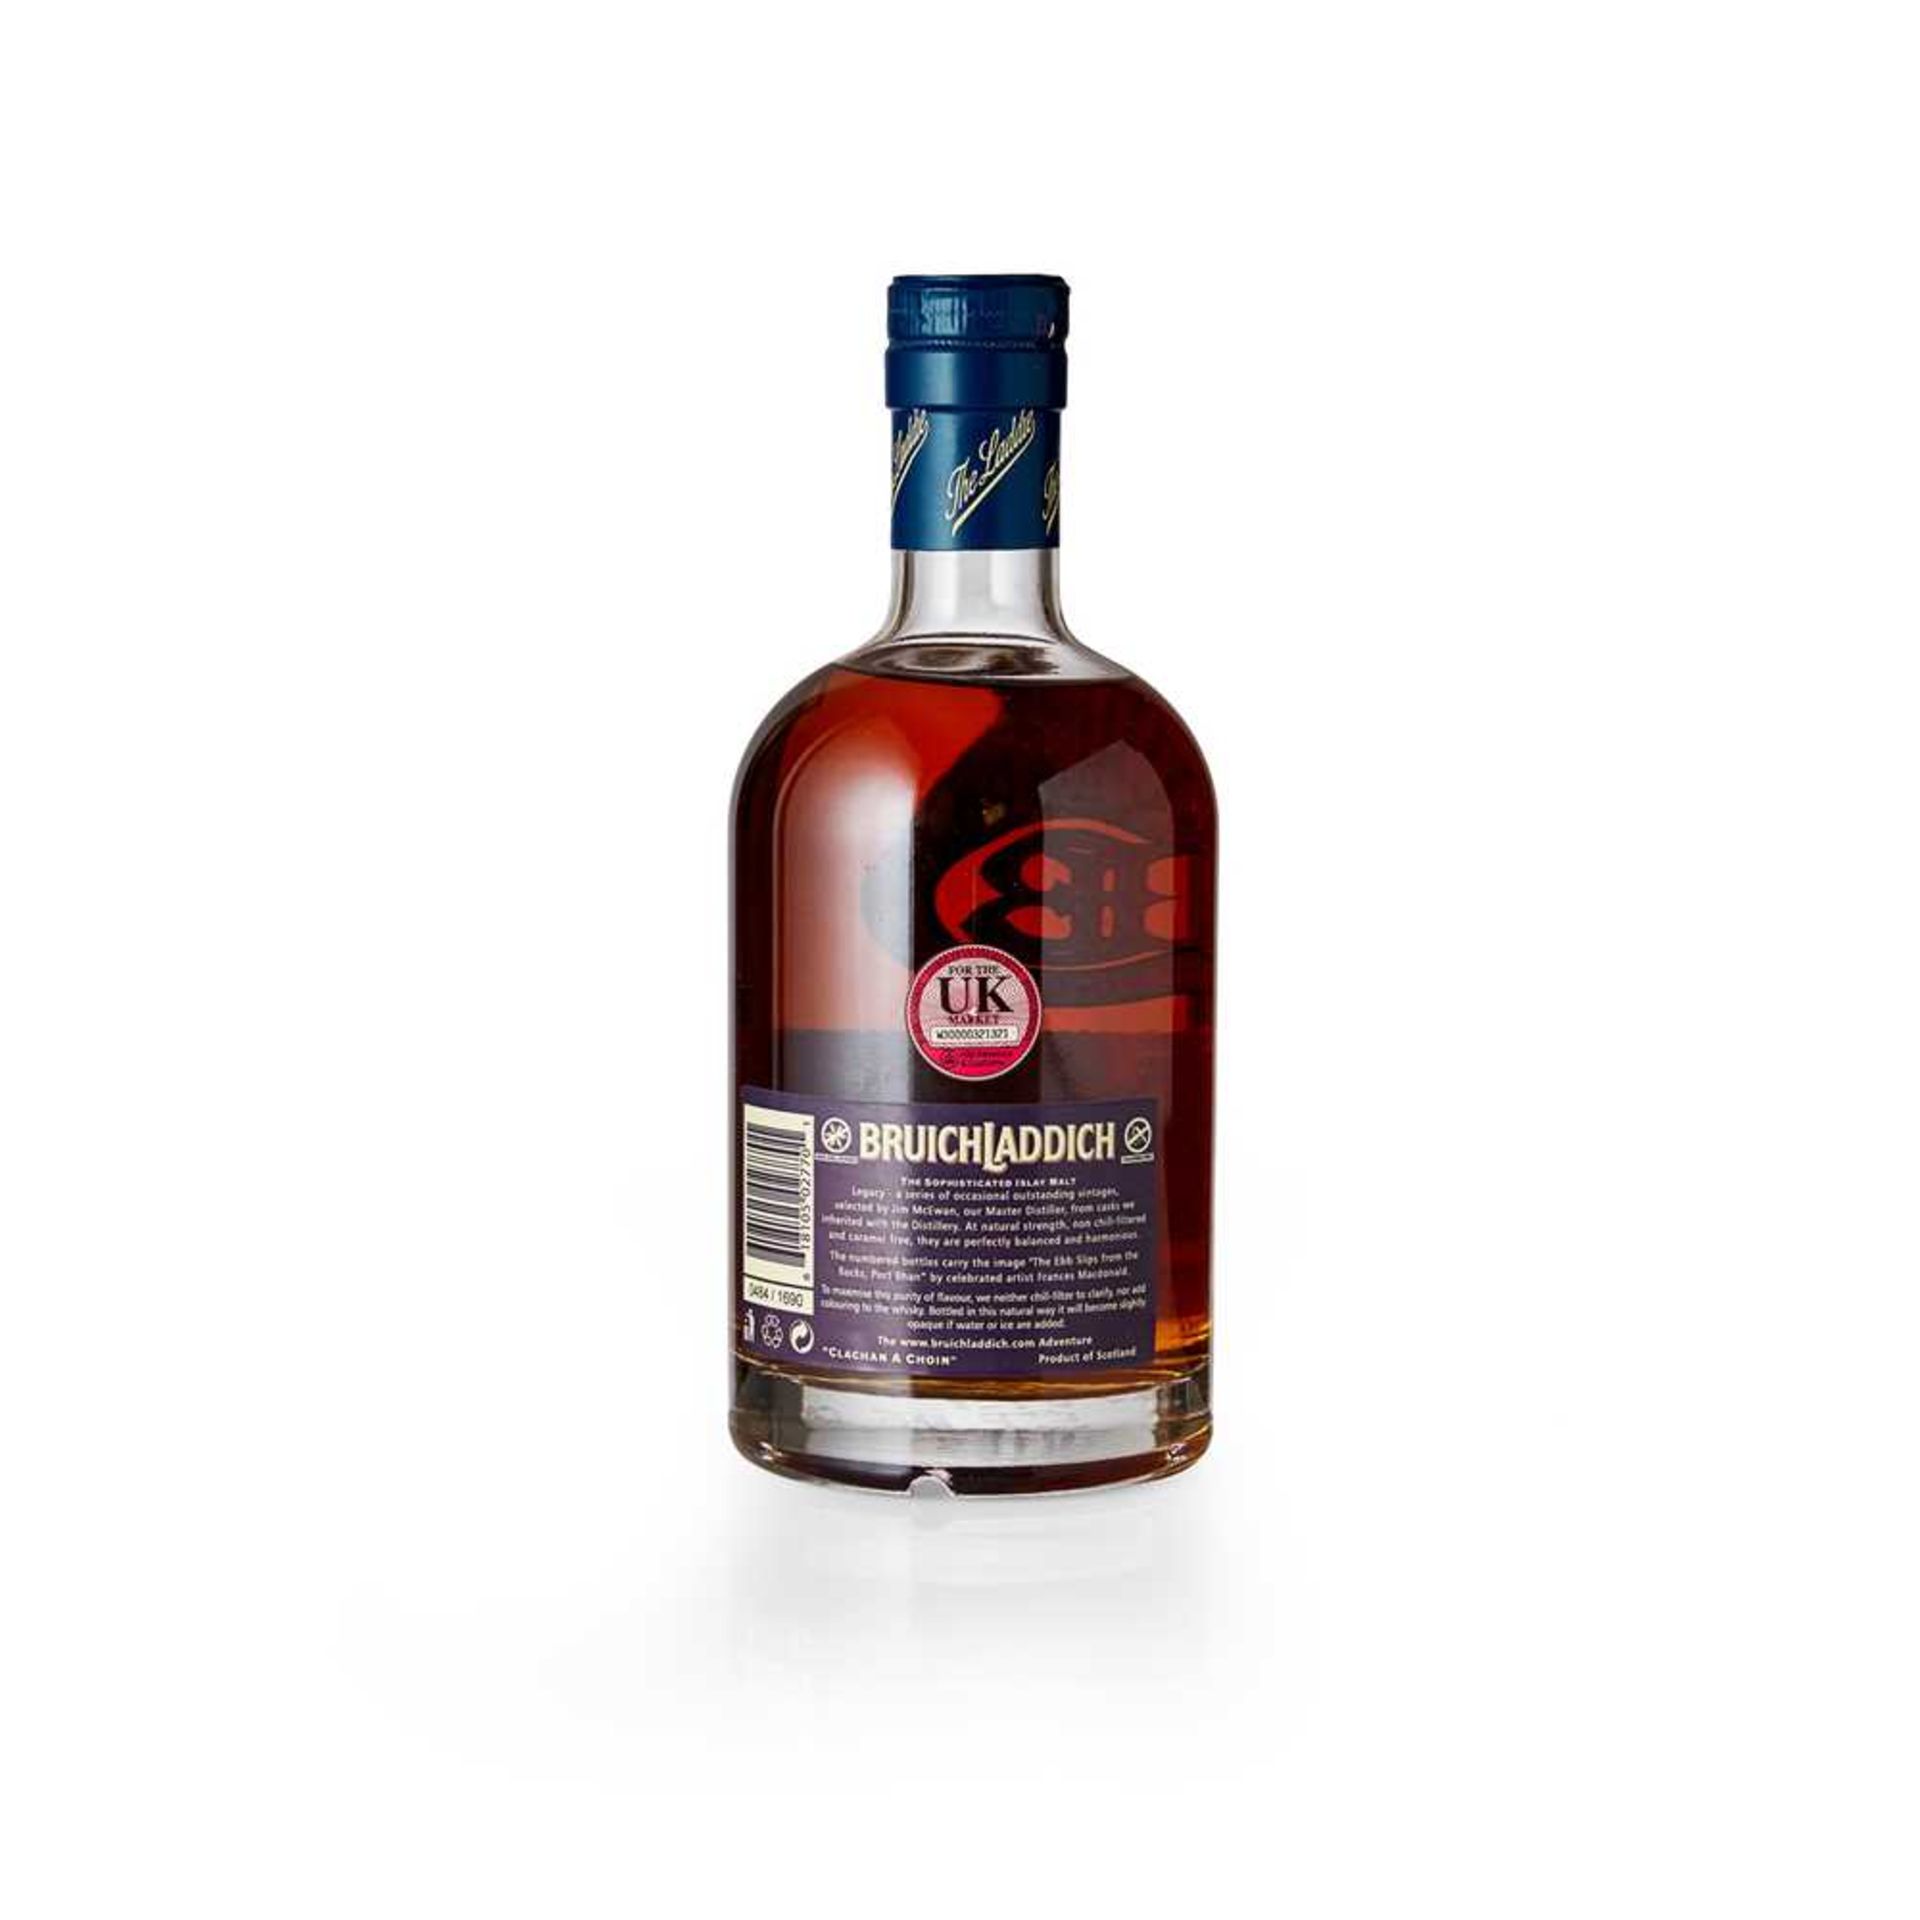 BRUICHLADDICH 33 YEAR OLD LEGACY SERIES FIVE - Image 2 of 3